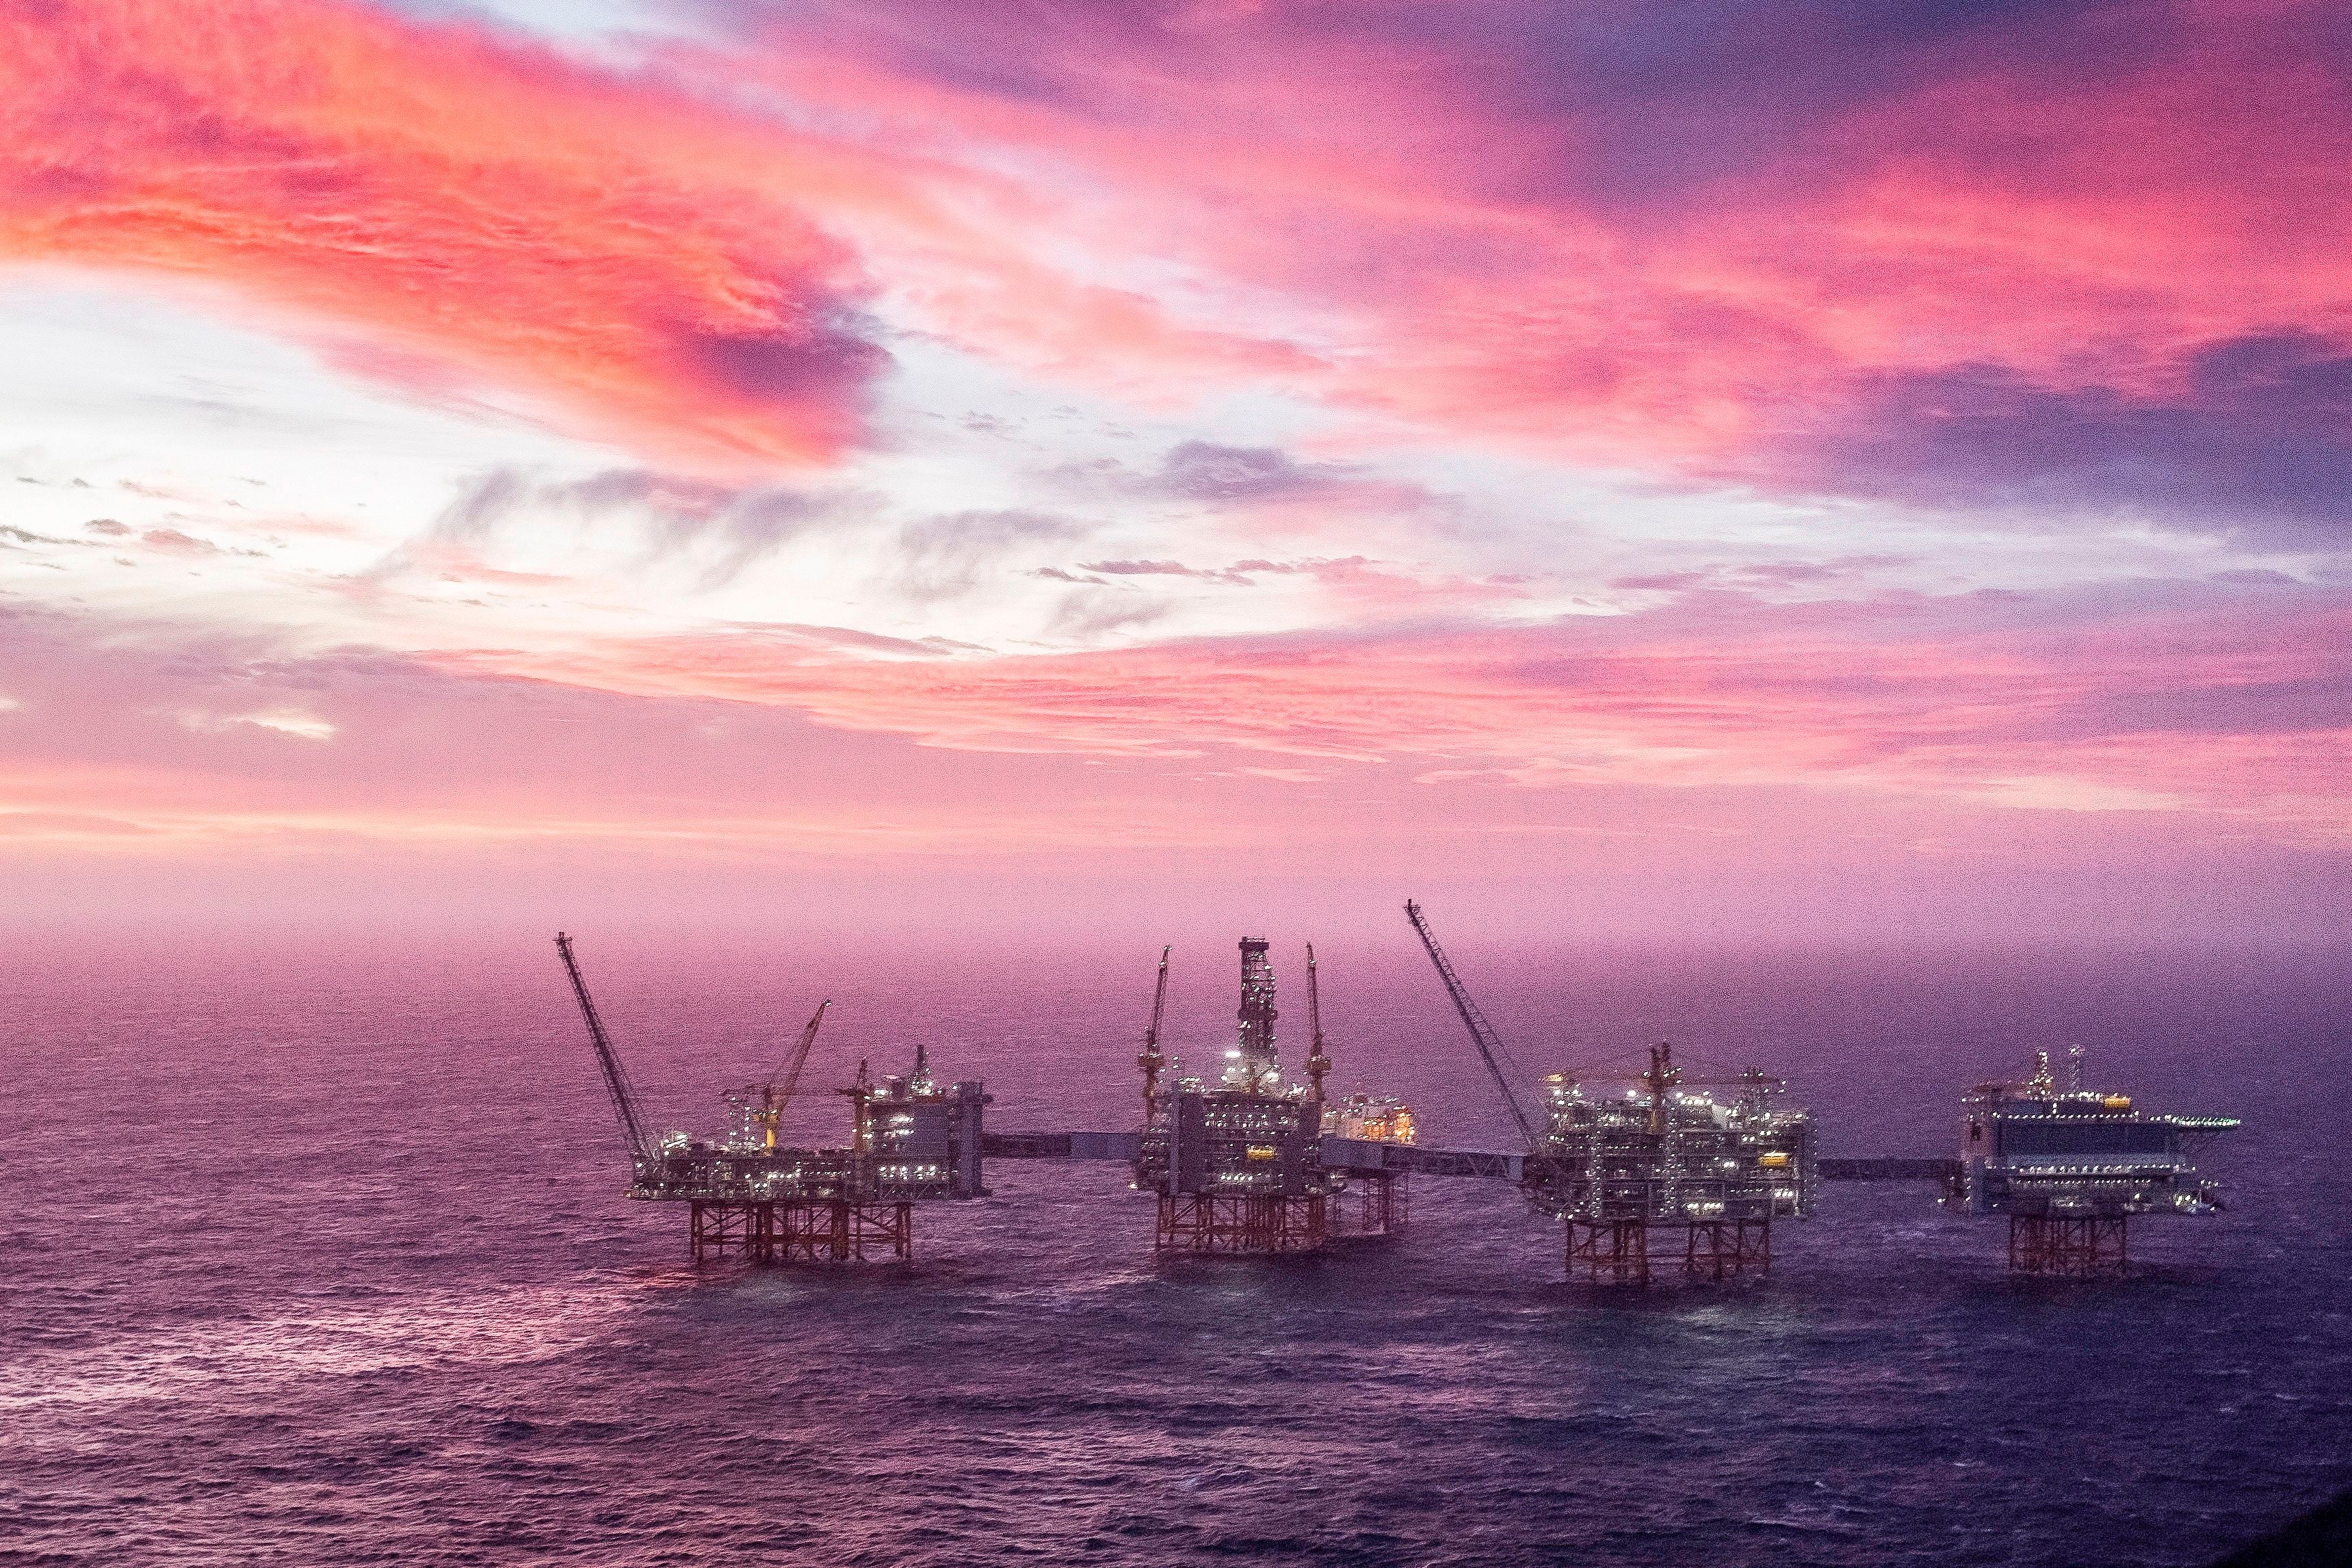 The chancellor has previously supported £11bn of new investments in North Sea oil